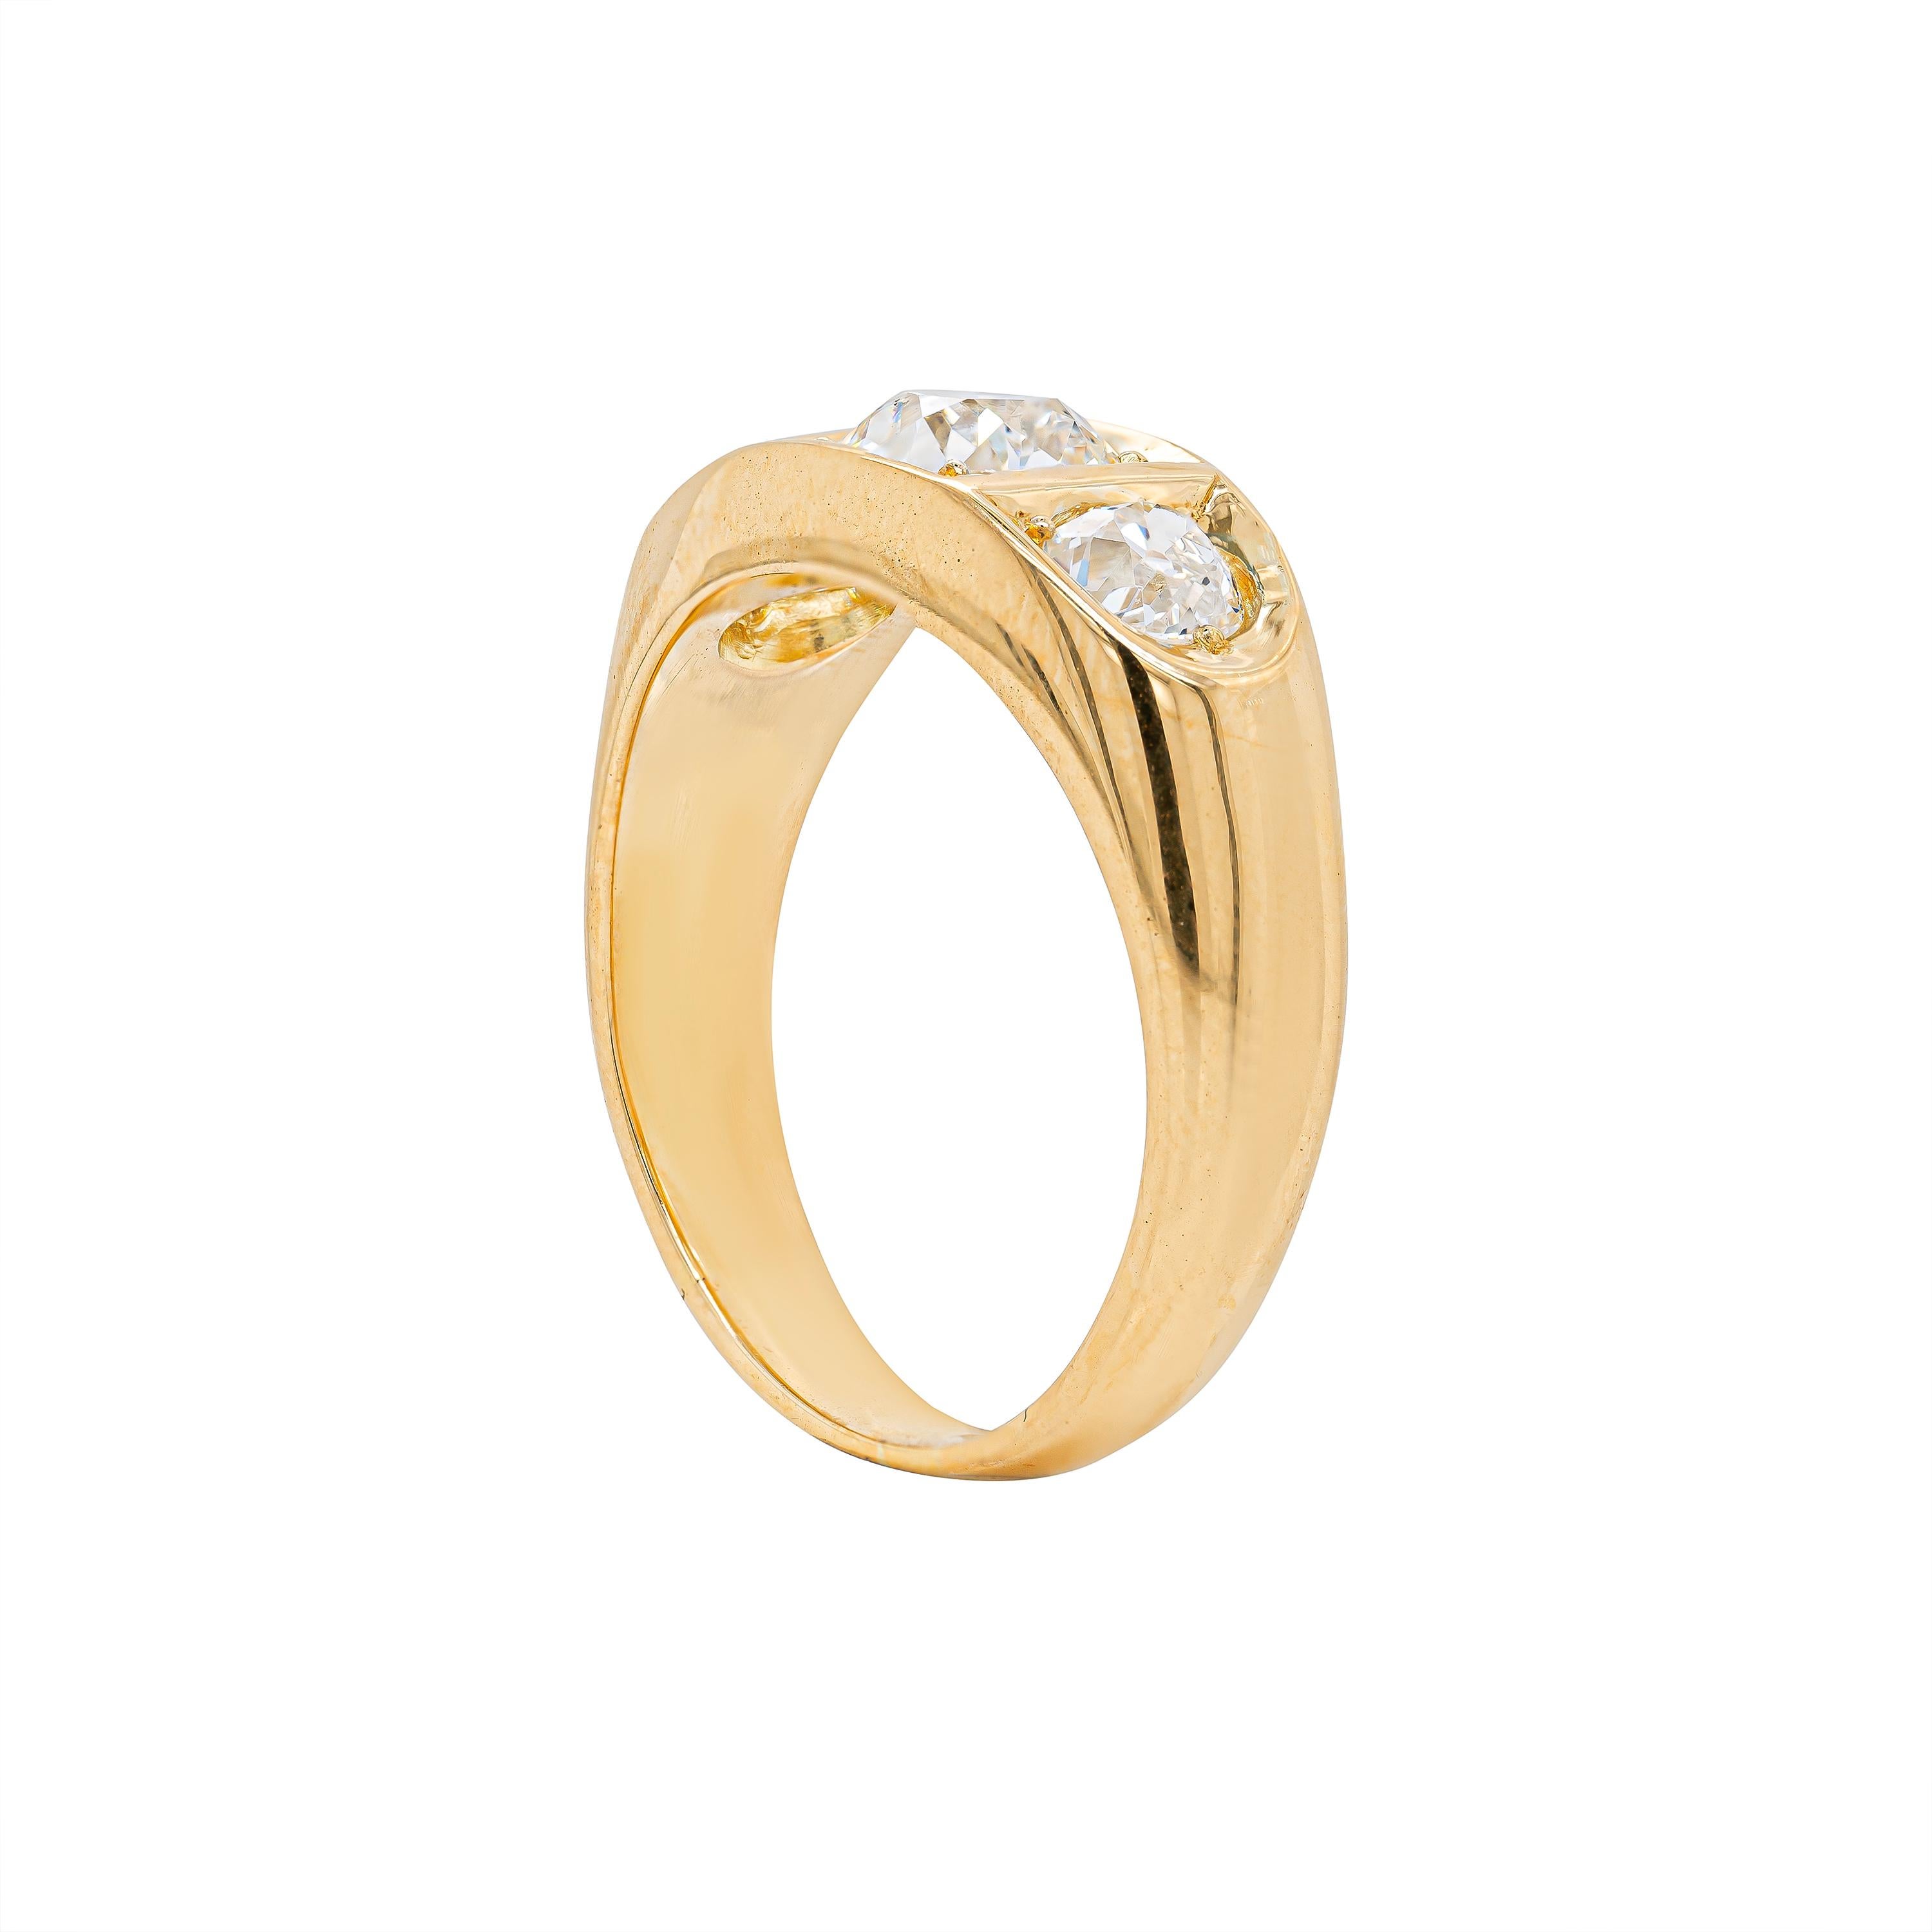 Bold and brilliant, this 18 carat yellow gold gents 'Gypsy' ring is beautifully centred with an old mine cut diamond, set within a square mount. Flanking either side of the centre stone is an additional old mine cut diamond bringing the total